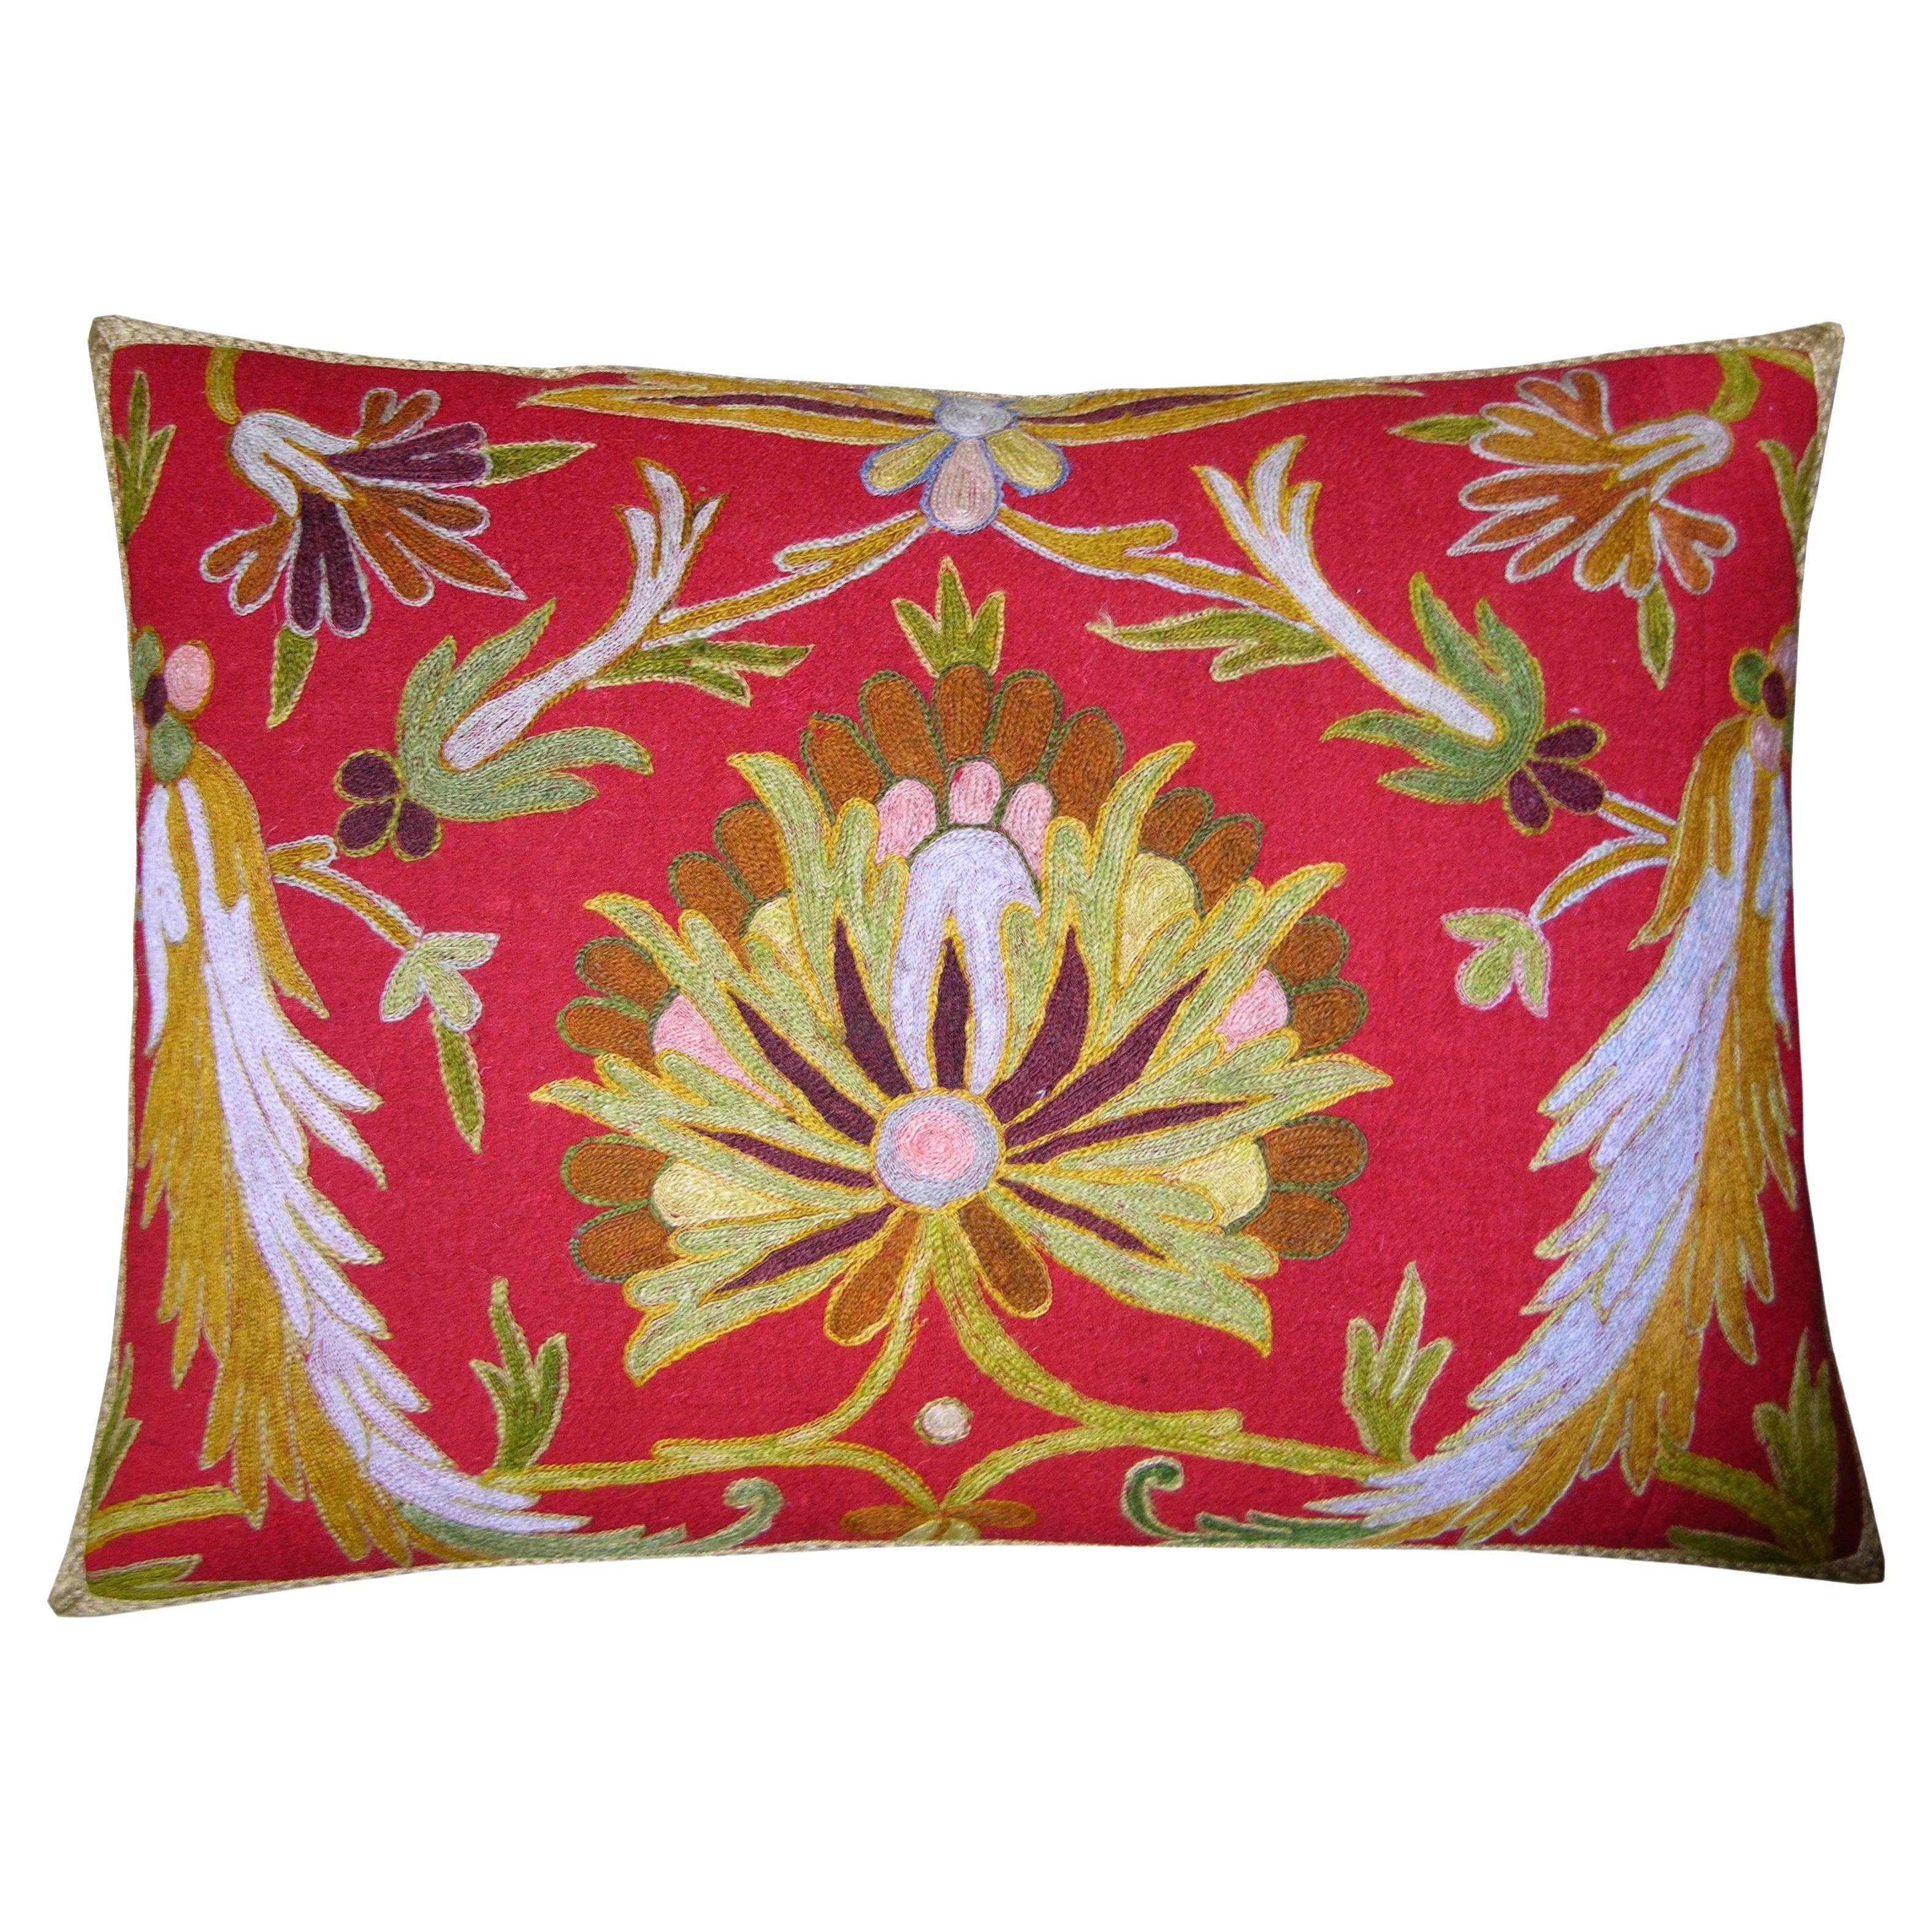 Circa 1900 Antique Embroidery Indian Pillow For Sale